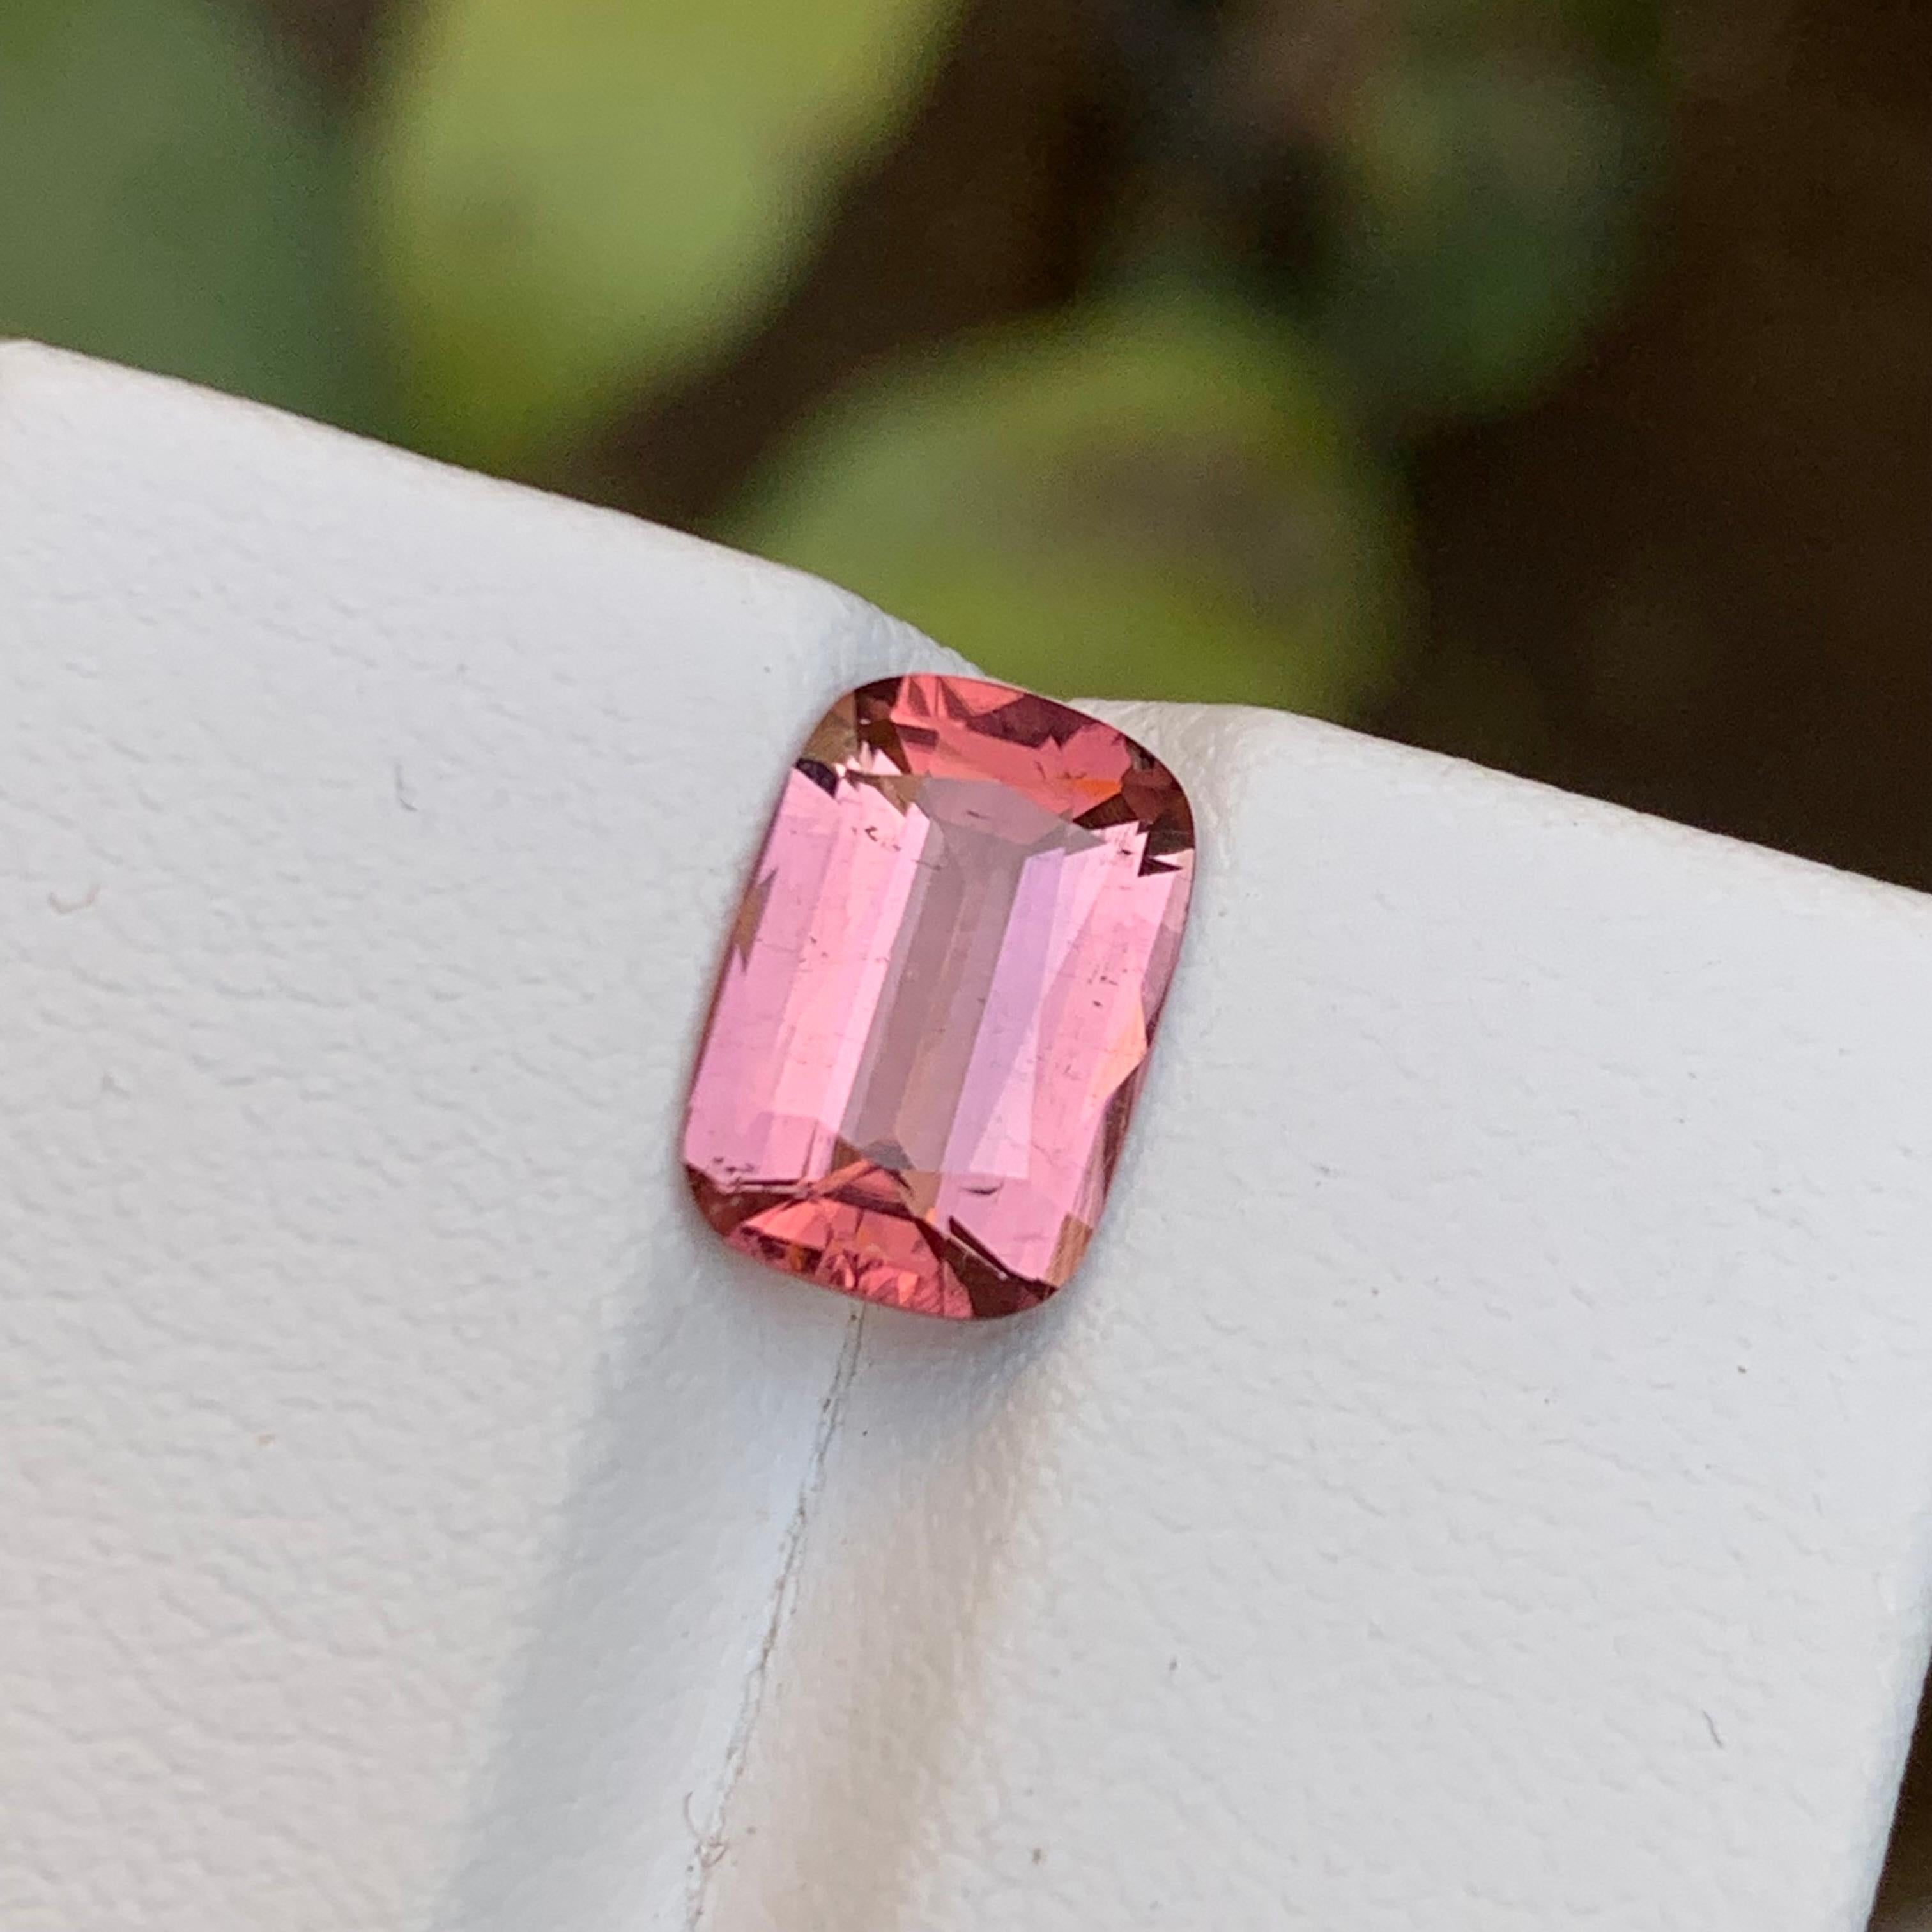 Captivating Cushion-Cut Pink Tourmaline from Kunar, Afghanistan

GEMSTONE TYPE: Tourmaline
PIECE(S): 1
WEIGHT: 2.30 Carat
SHAPE: Cushion
SIZE (MM):  10.24 x 7.03 x 4.16 
COLOR: Pink
CLARITY: Slightly Included 
TREATMENT: Heated
ORIGIN: